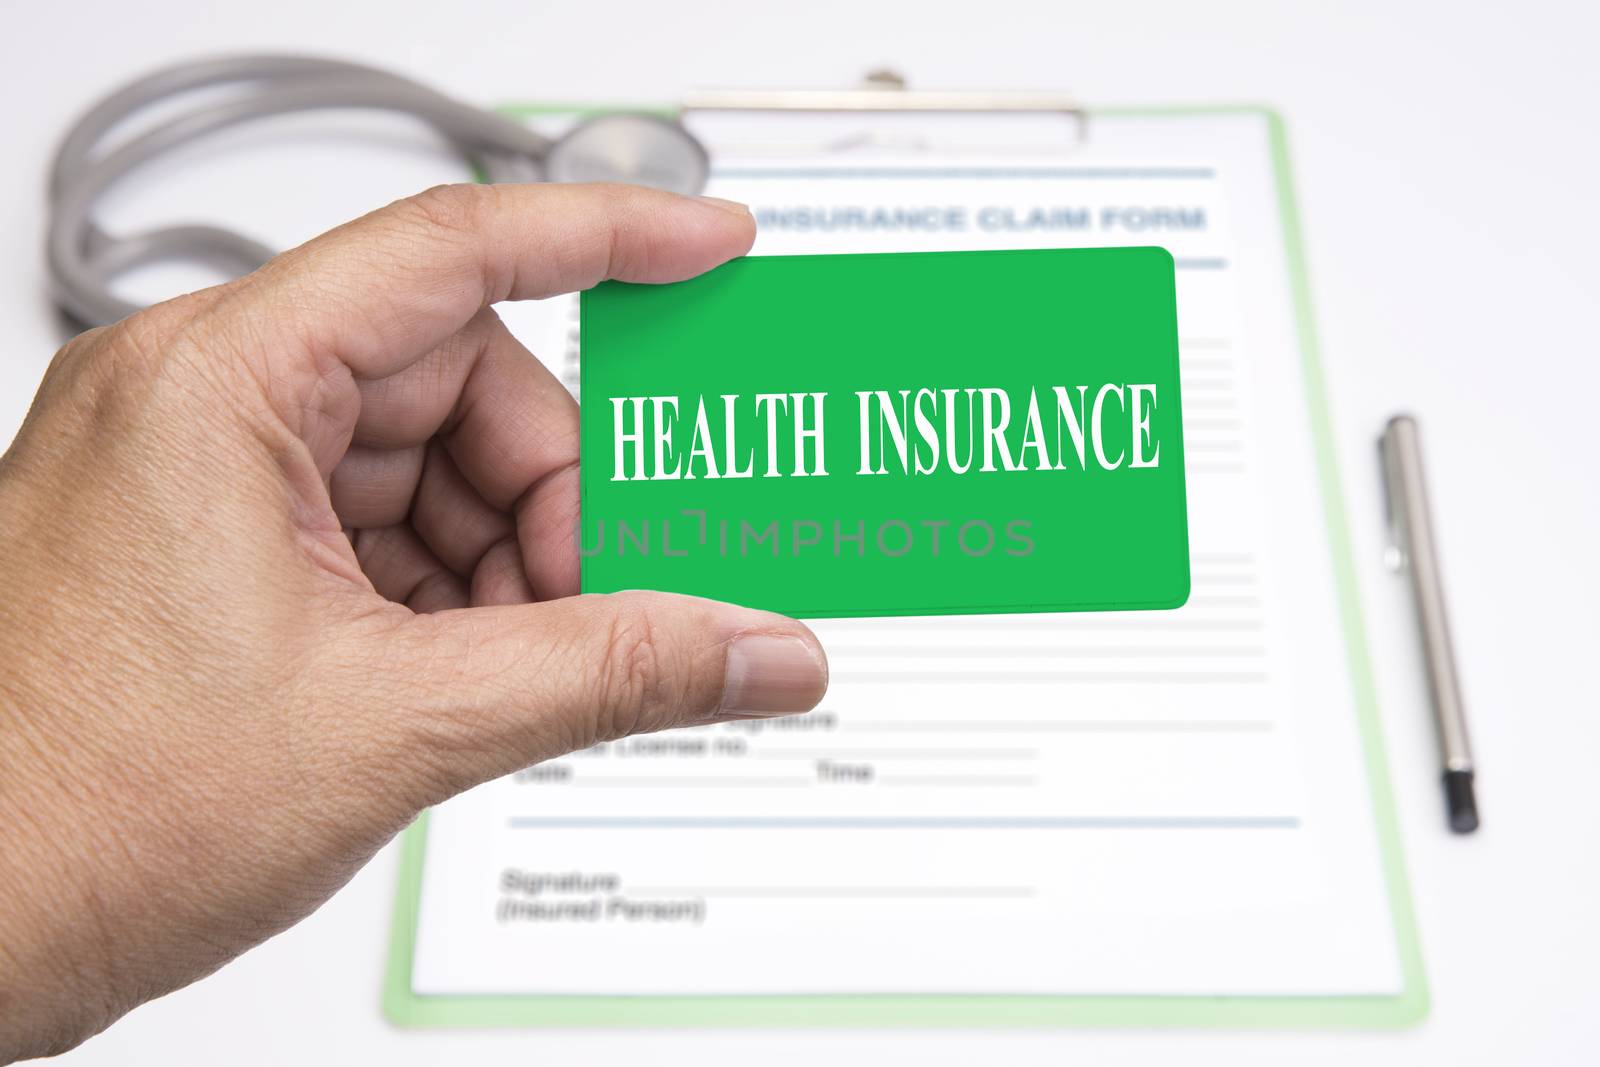 Health insurance member card in someone hand with insurance claim form in background.